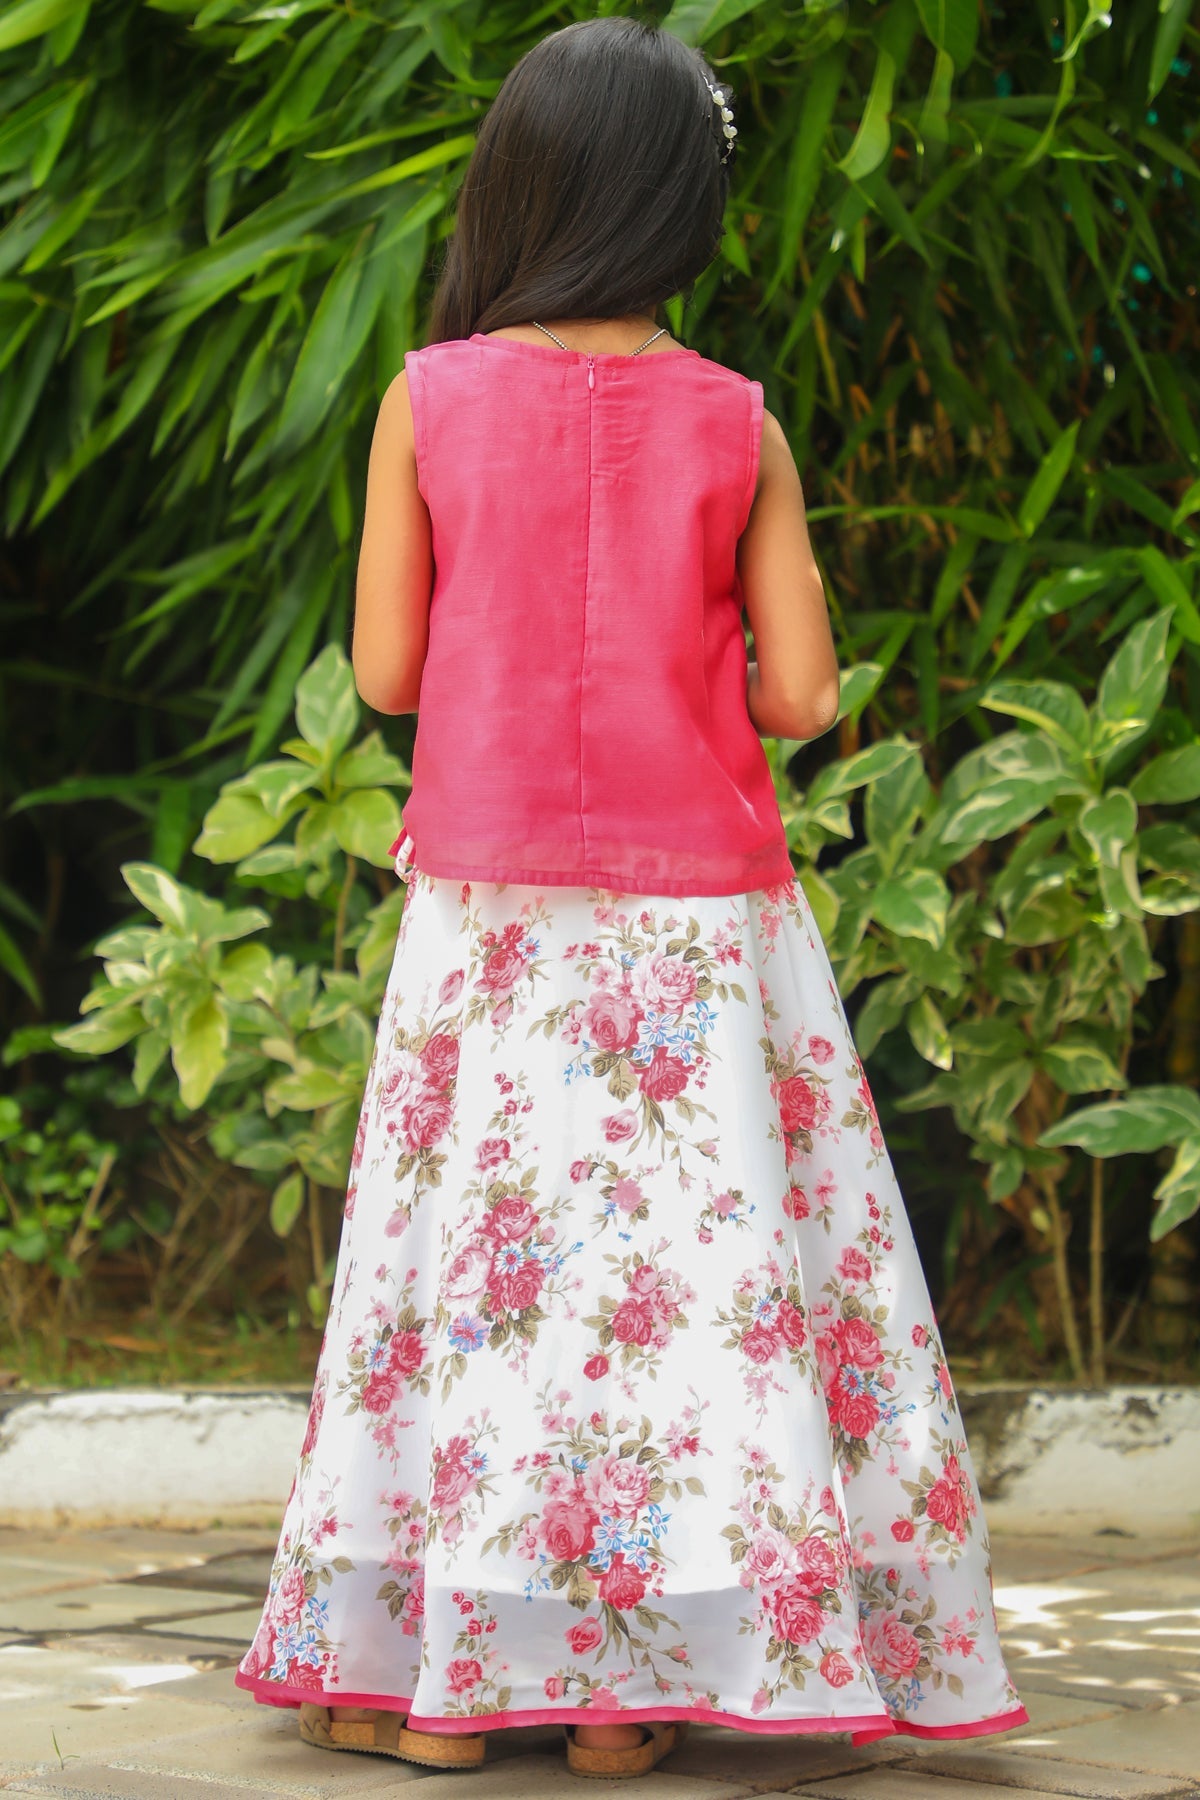 Floral Embroidered Sleeveless Top All Over Vintage Floral Printed Skirt Set Pink White